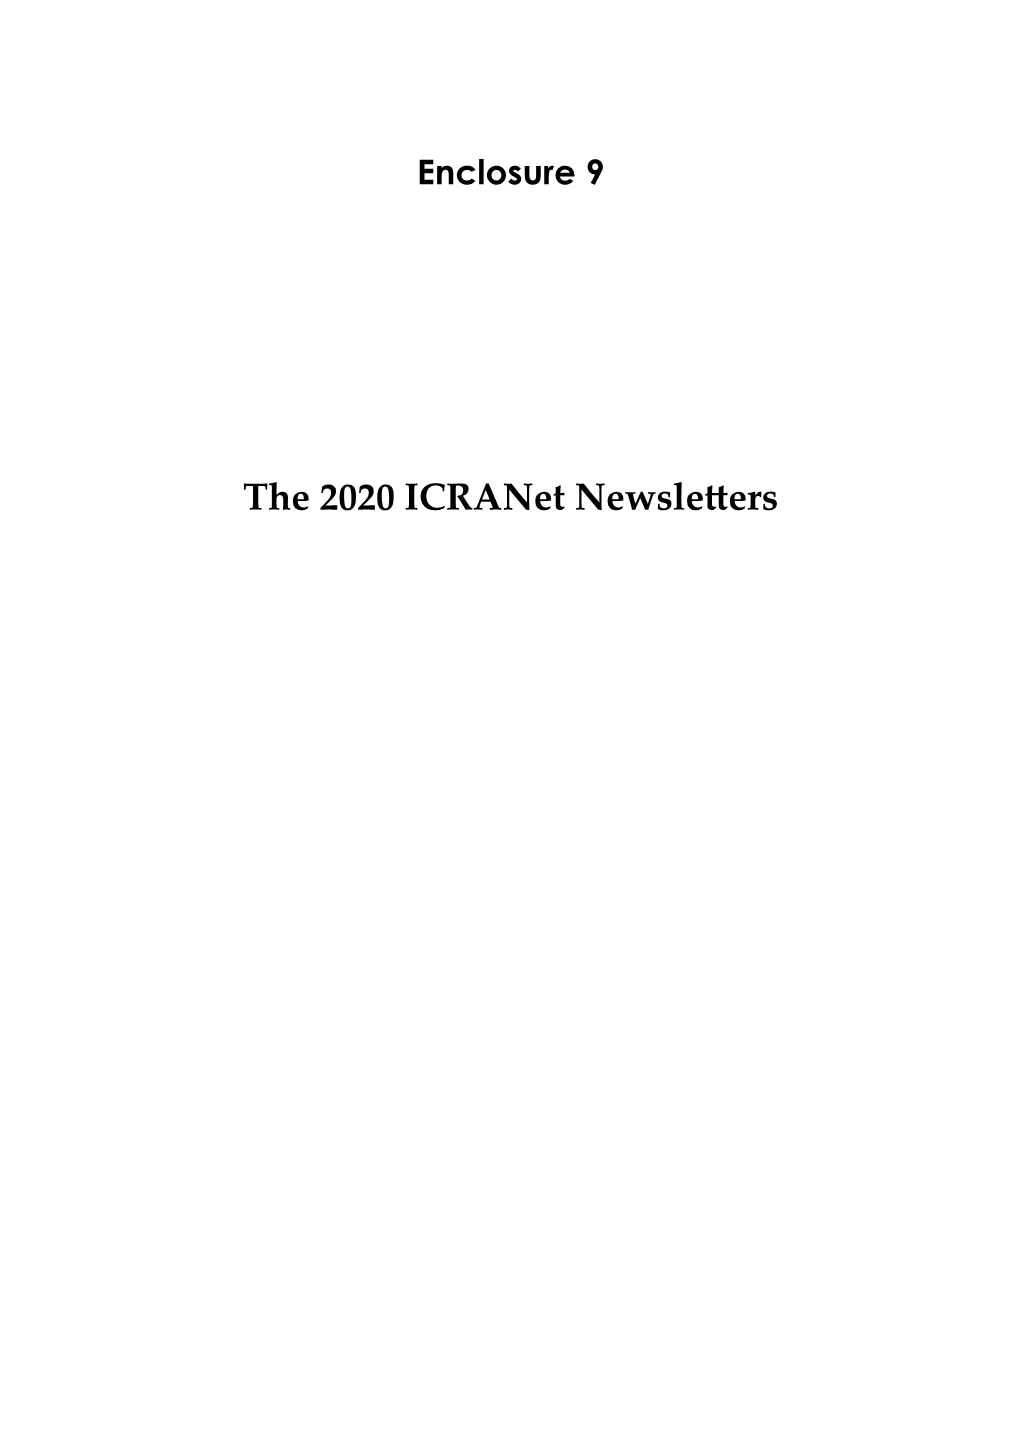 The 2020 Icranet Newsletters